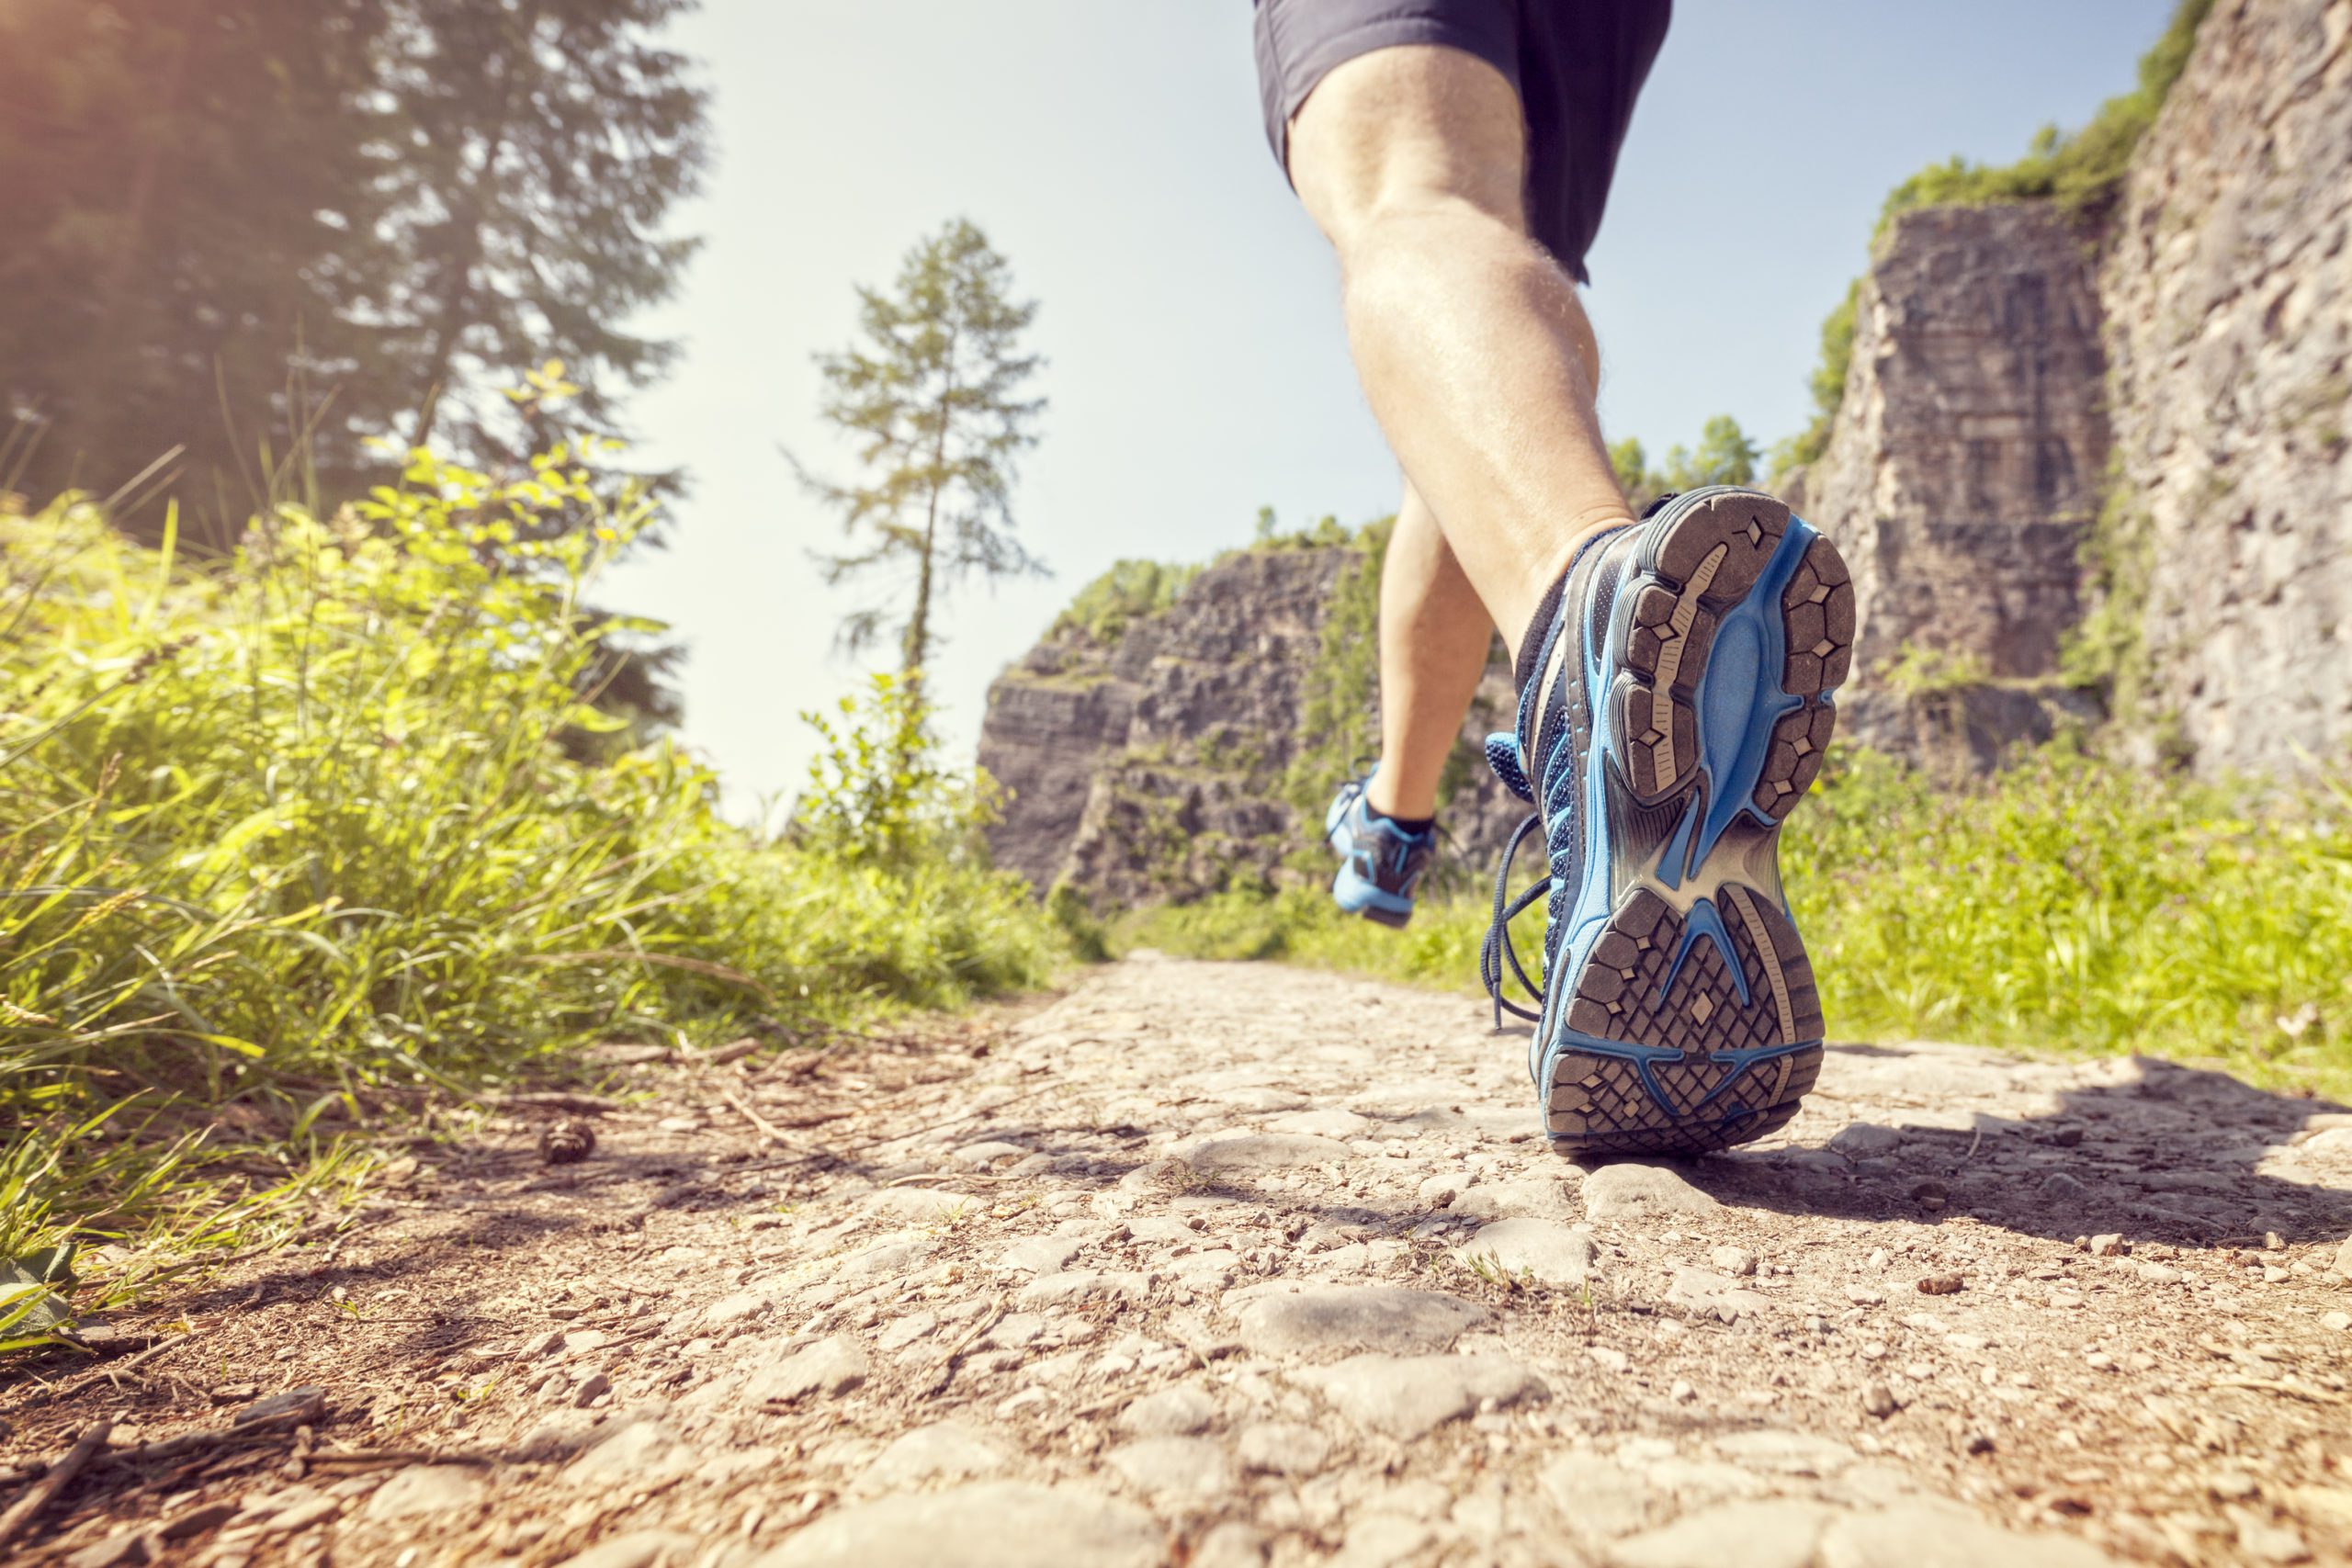 Trail runners prefer to race the marathon distance or longer, new study